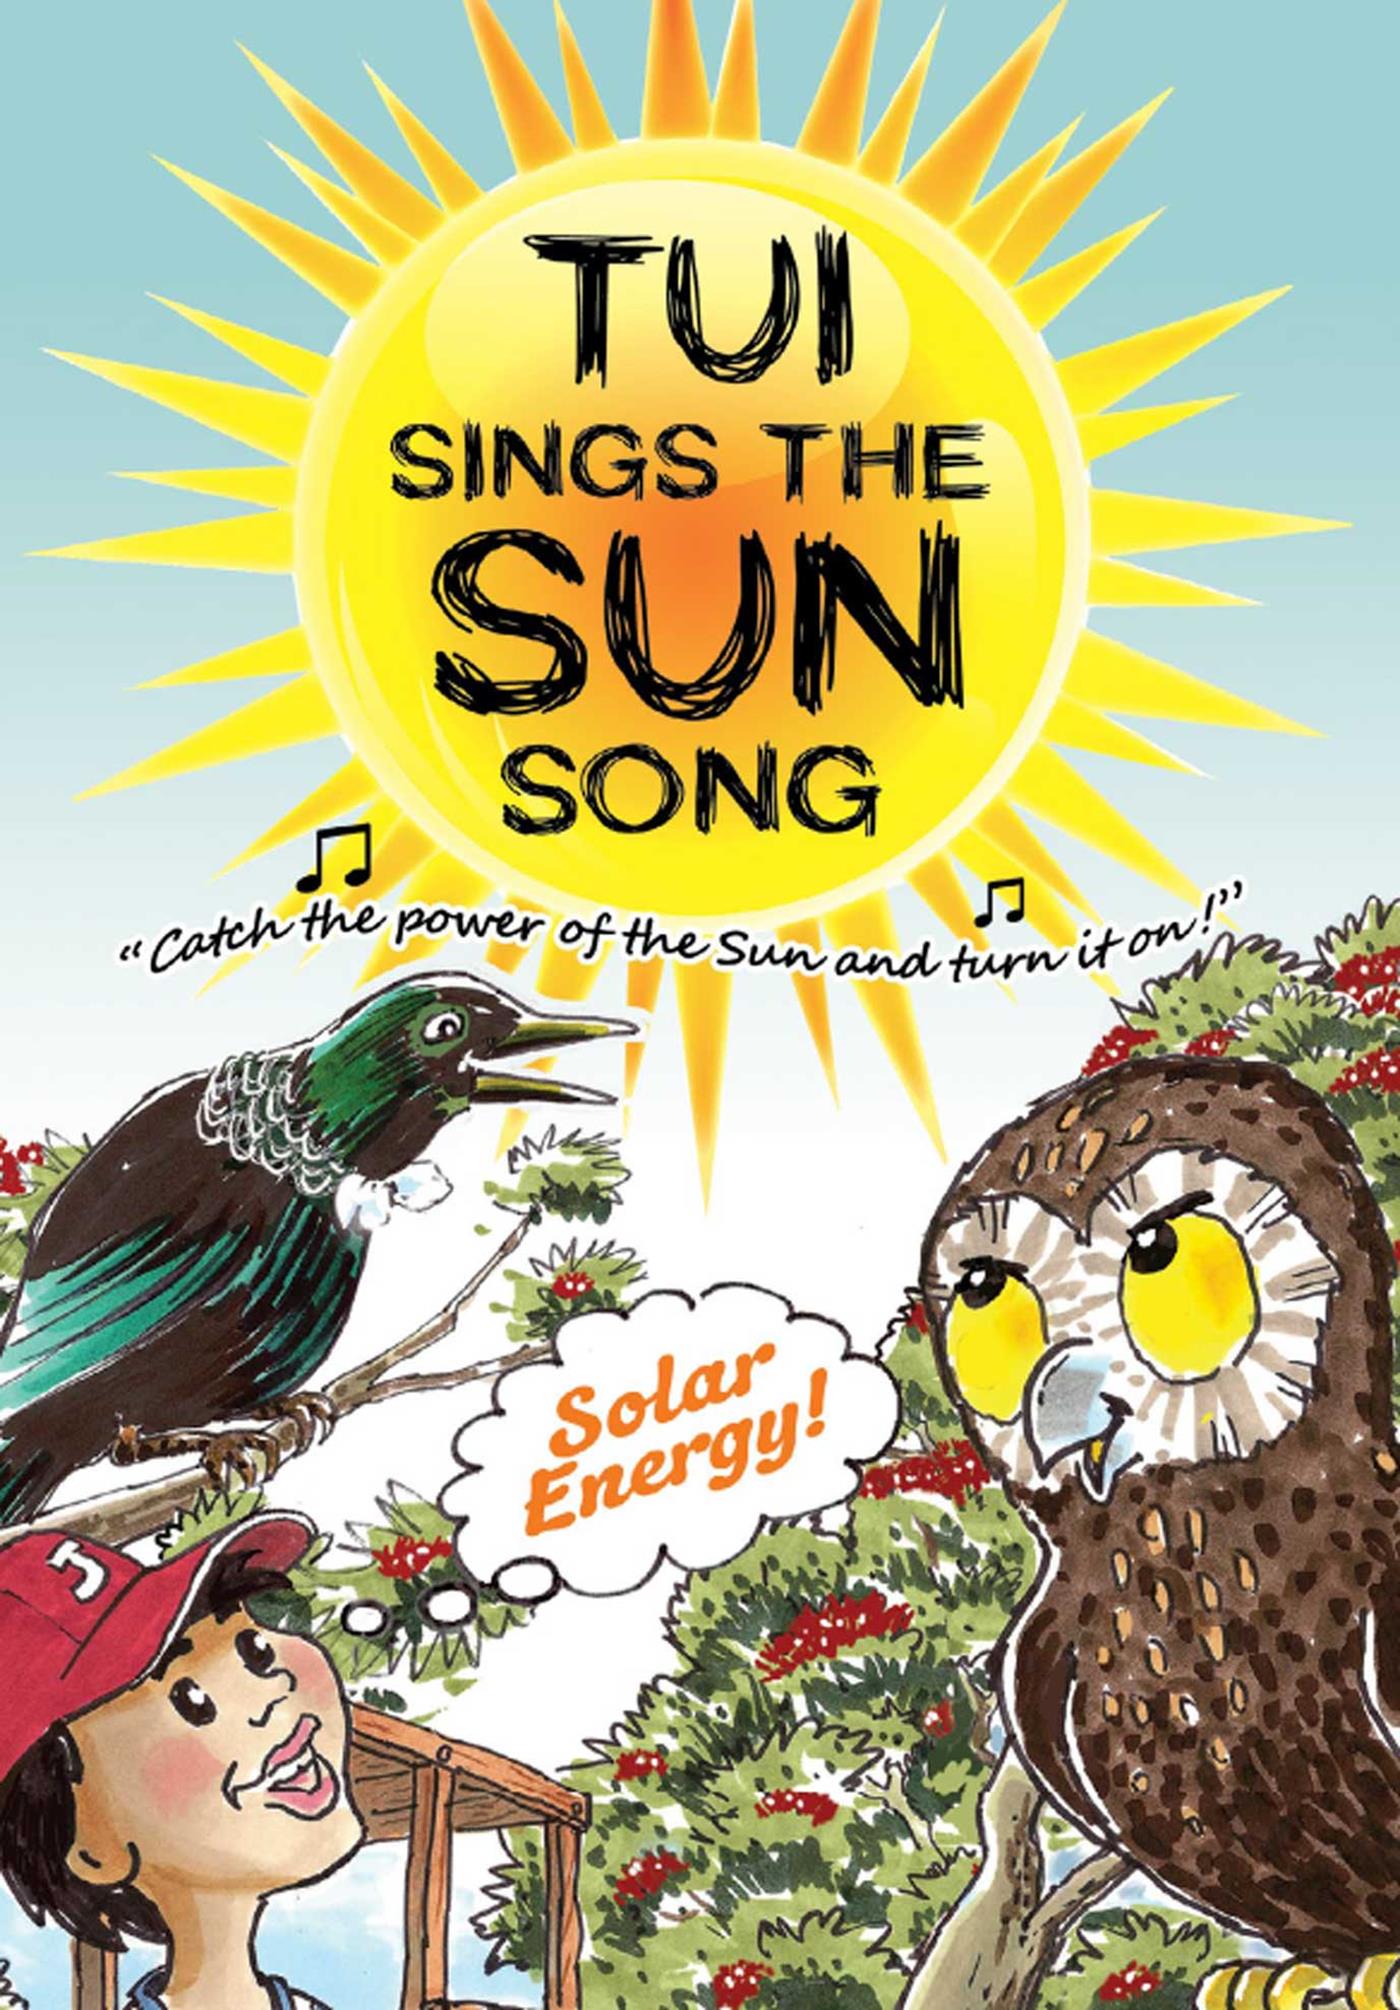 Tui Sings the Sun Song ebook cover